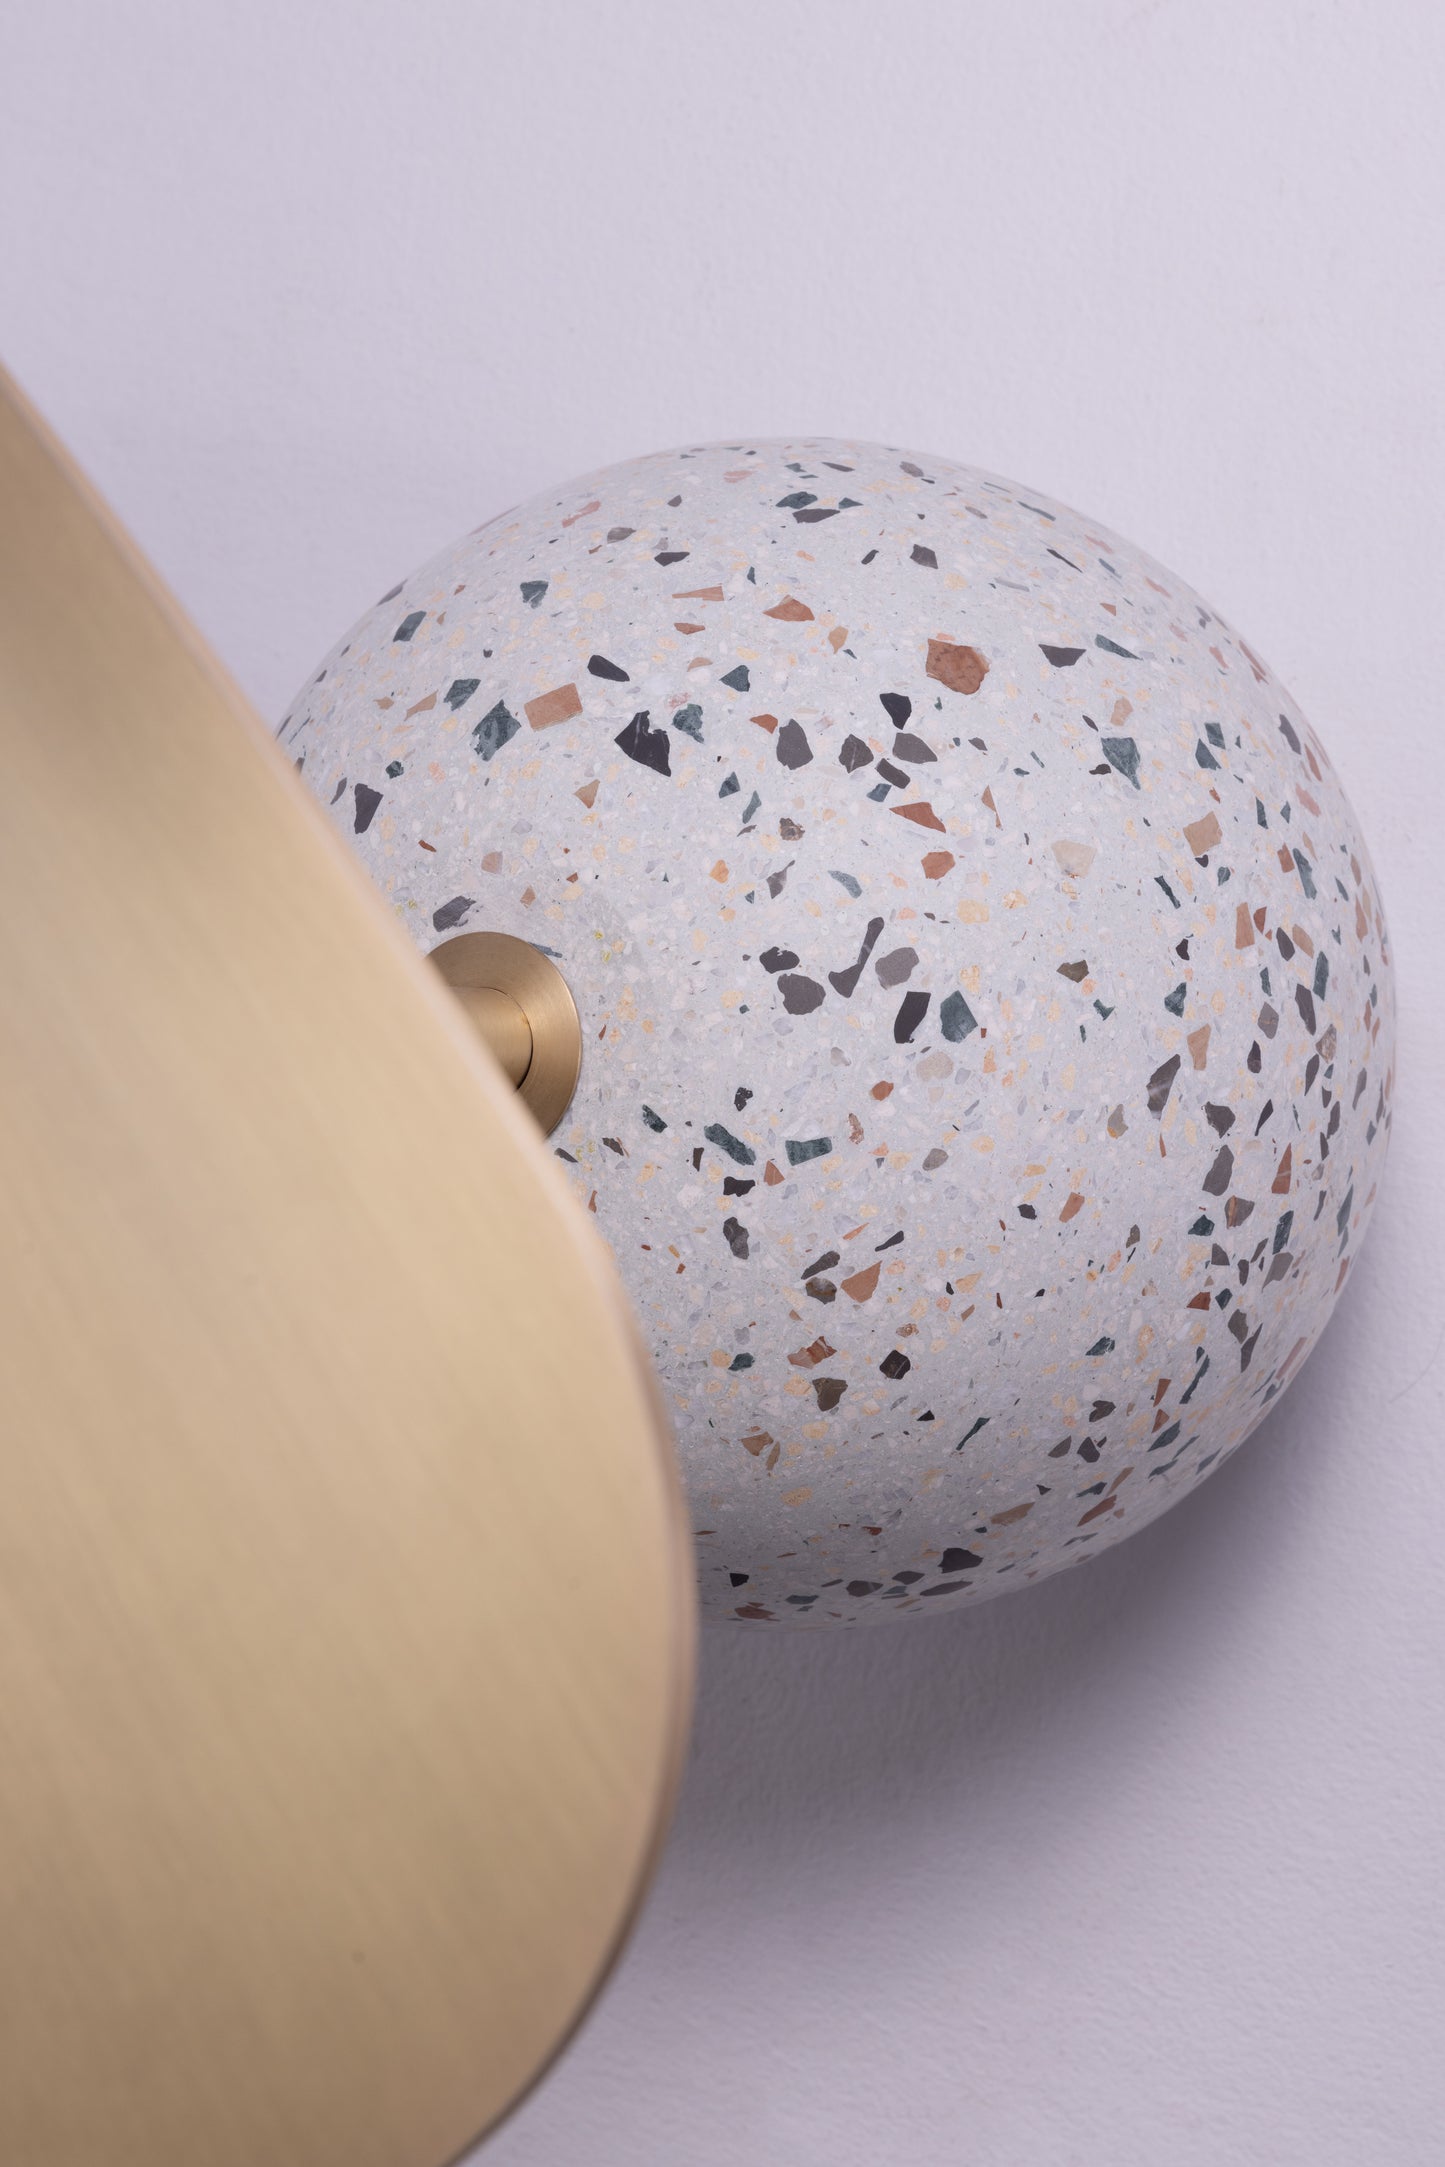 Crushed marble in a composite of terrazzo trendy end table 